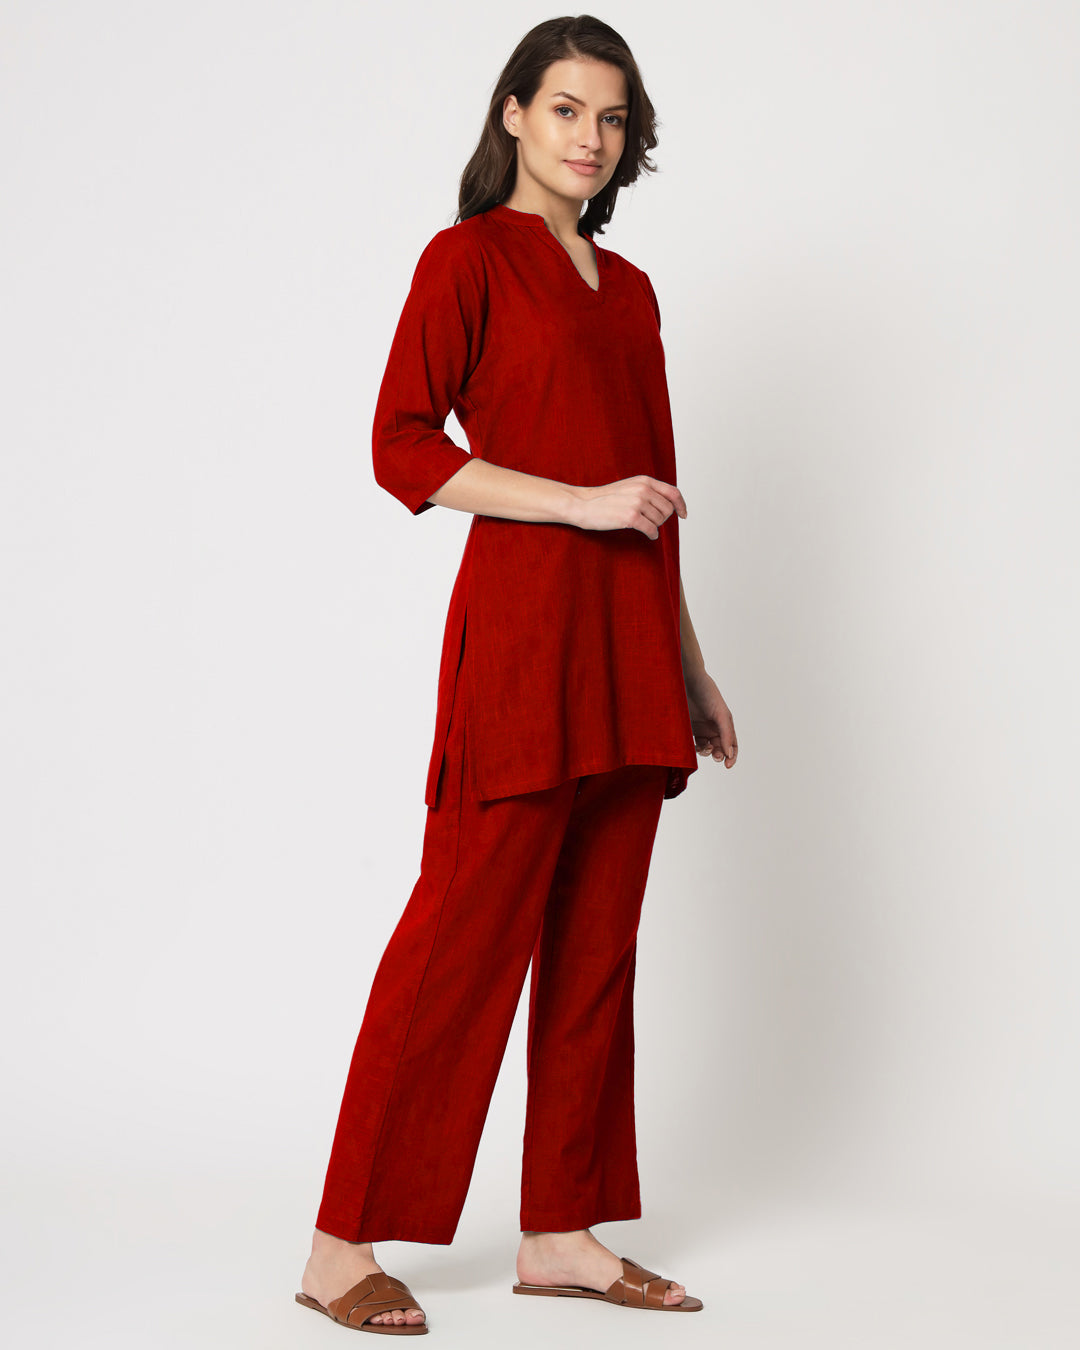 Classic Red Collar Neck Mid Length Solid Co-ord Set